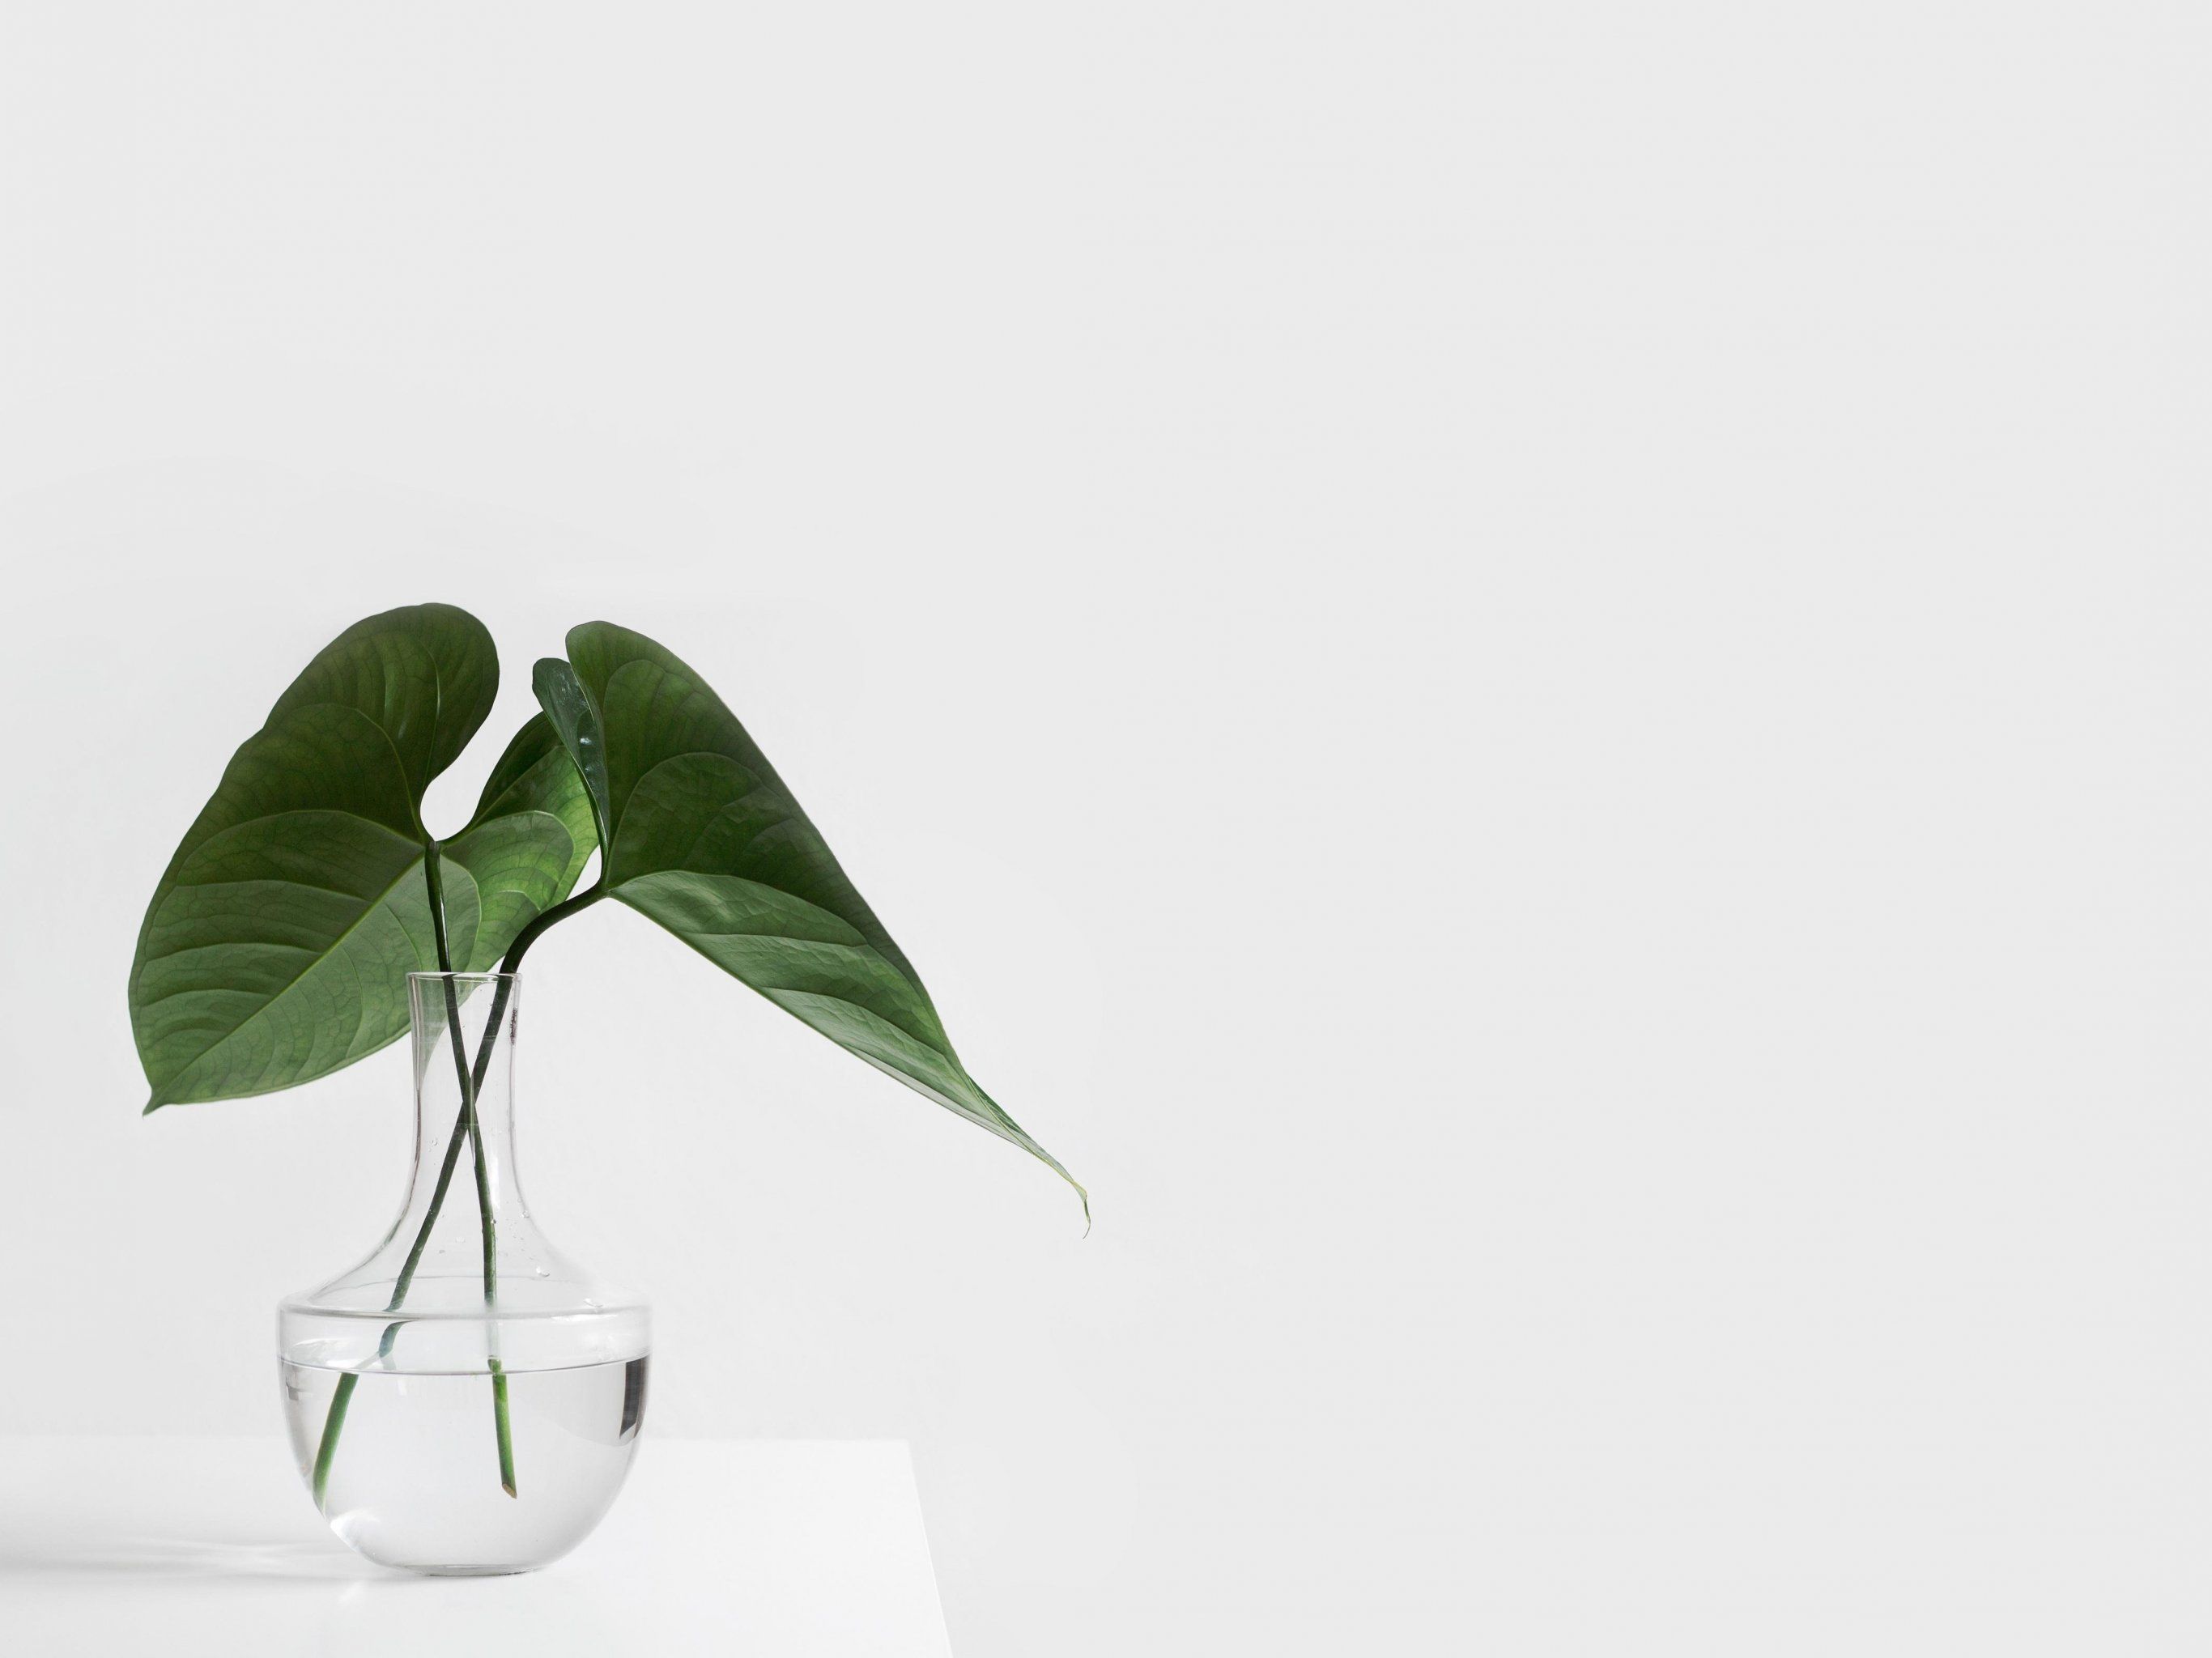 A green leaf in a vase of water on a white table. - Minimalist, clean